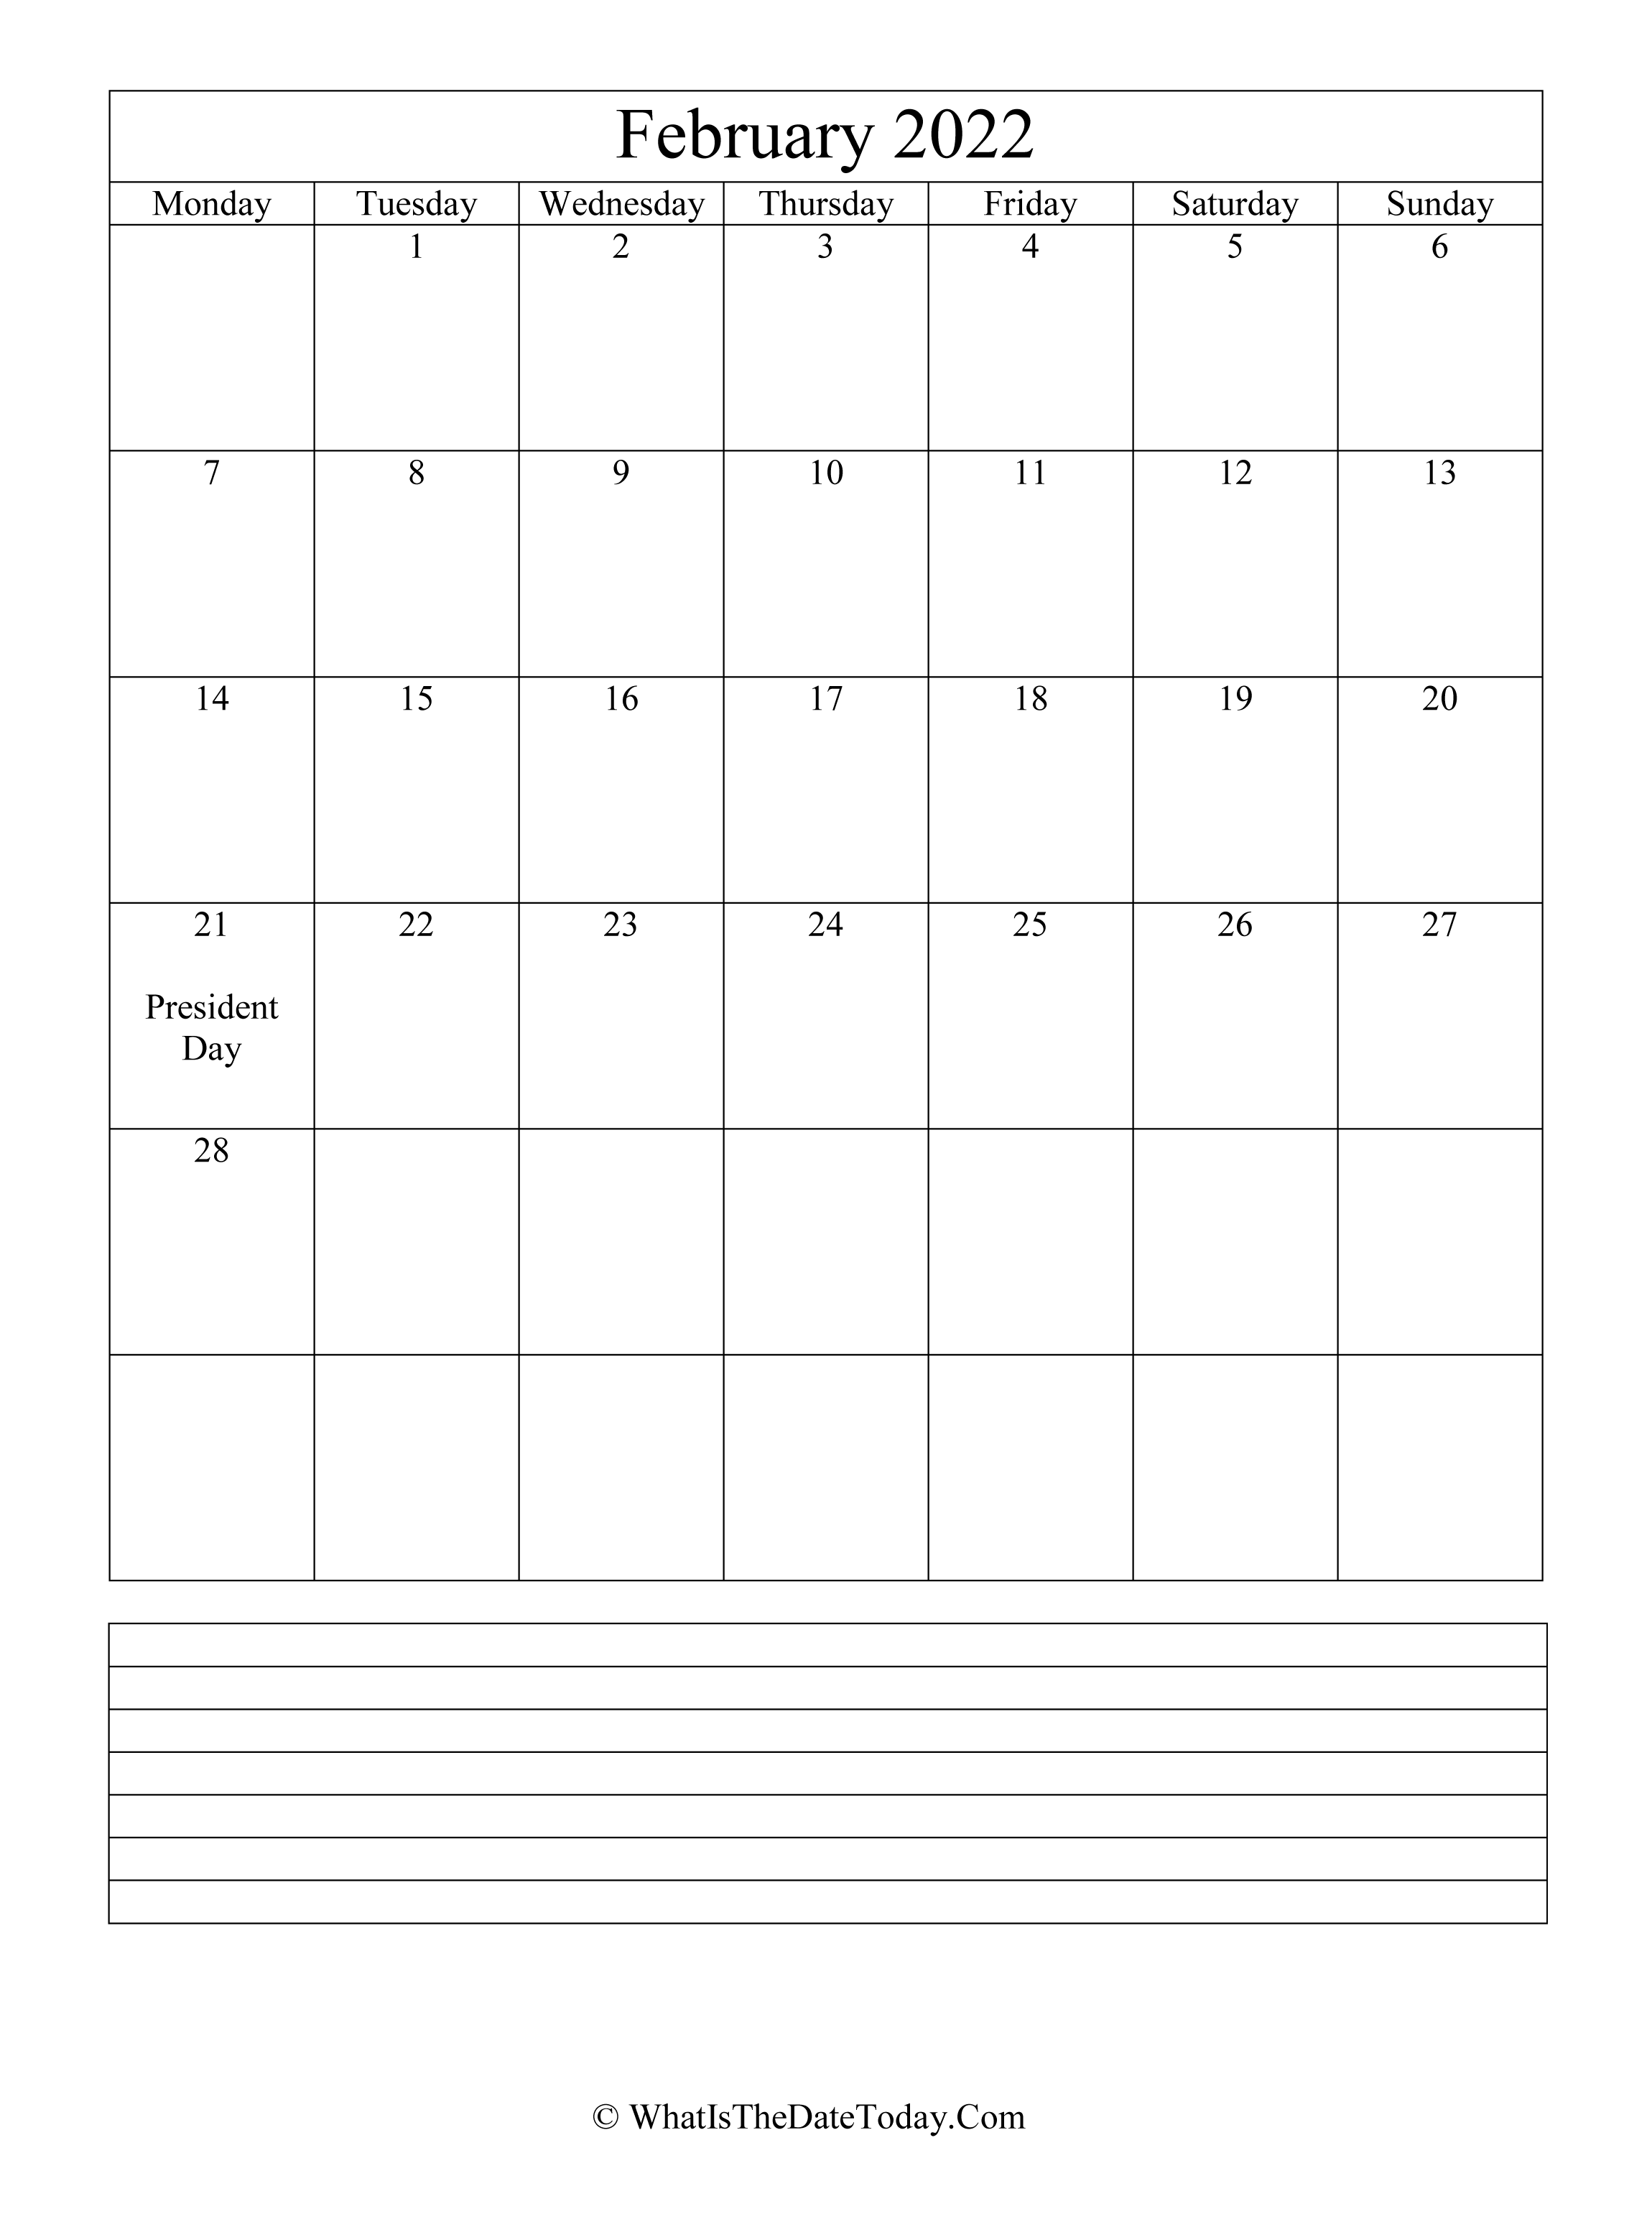 February 2022 Calendar Vertical February 2022 Calendar Editable With Notes Space (Vertical Layout)